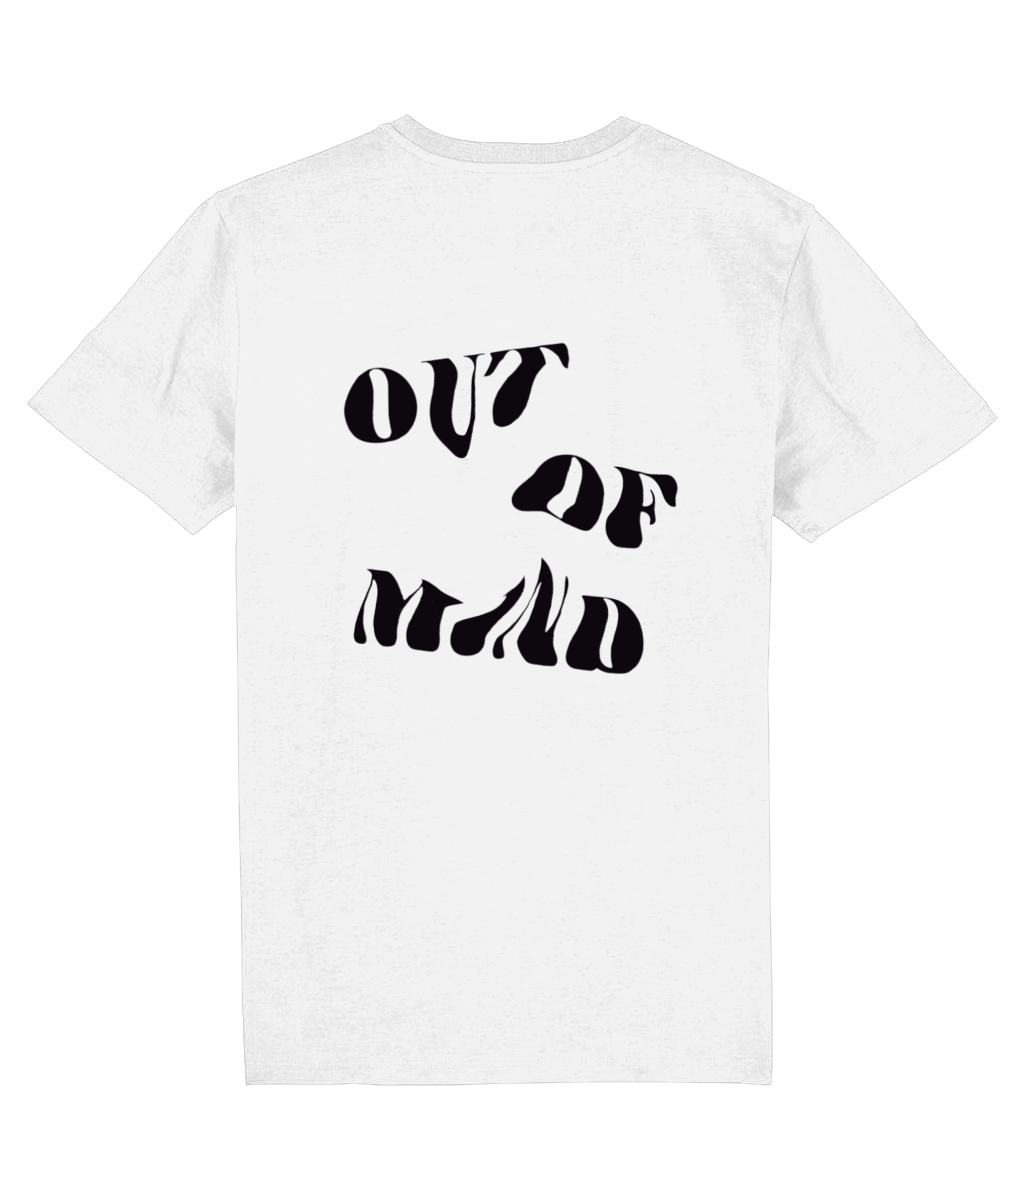 OUT OF MIND SHIRT